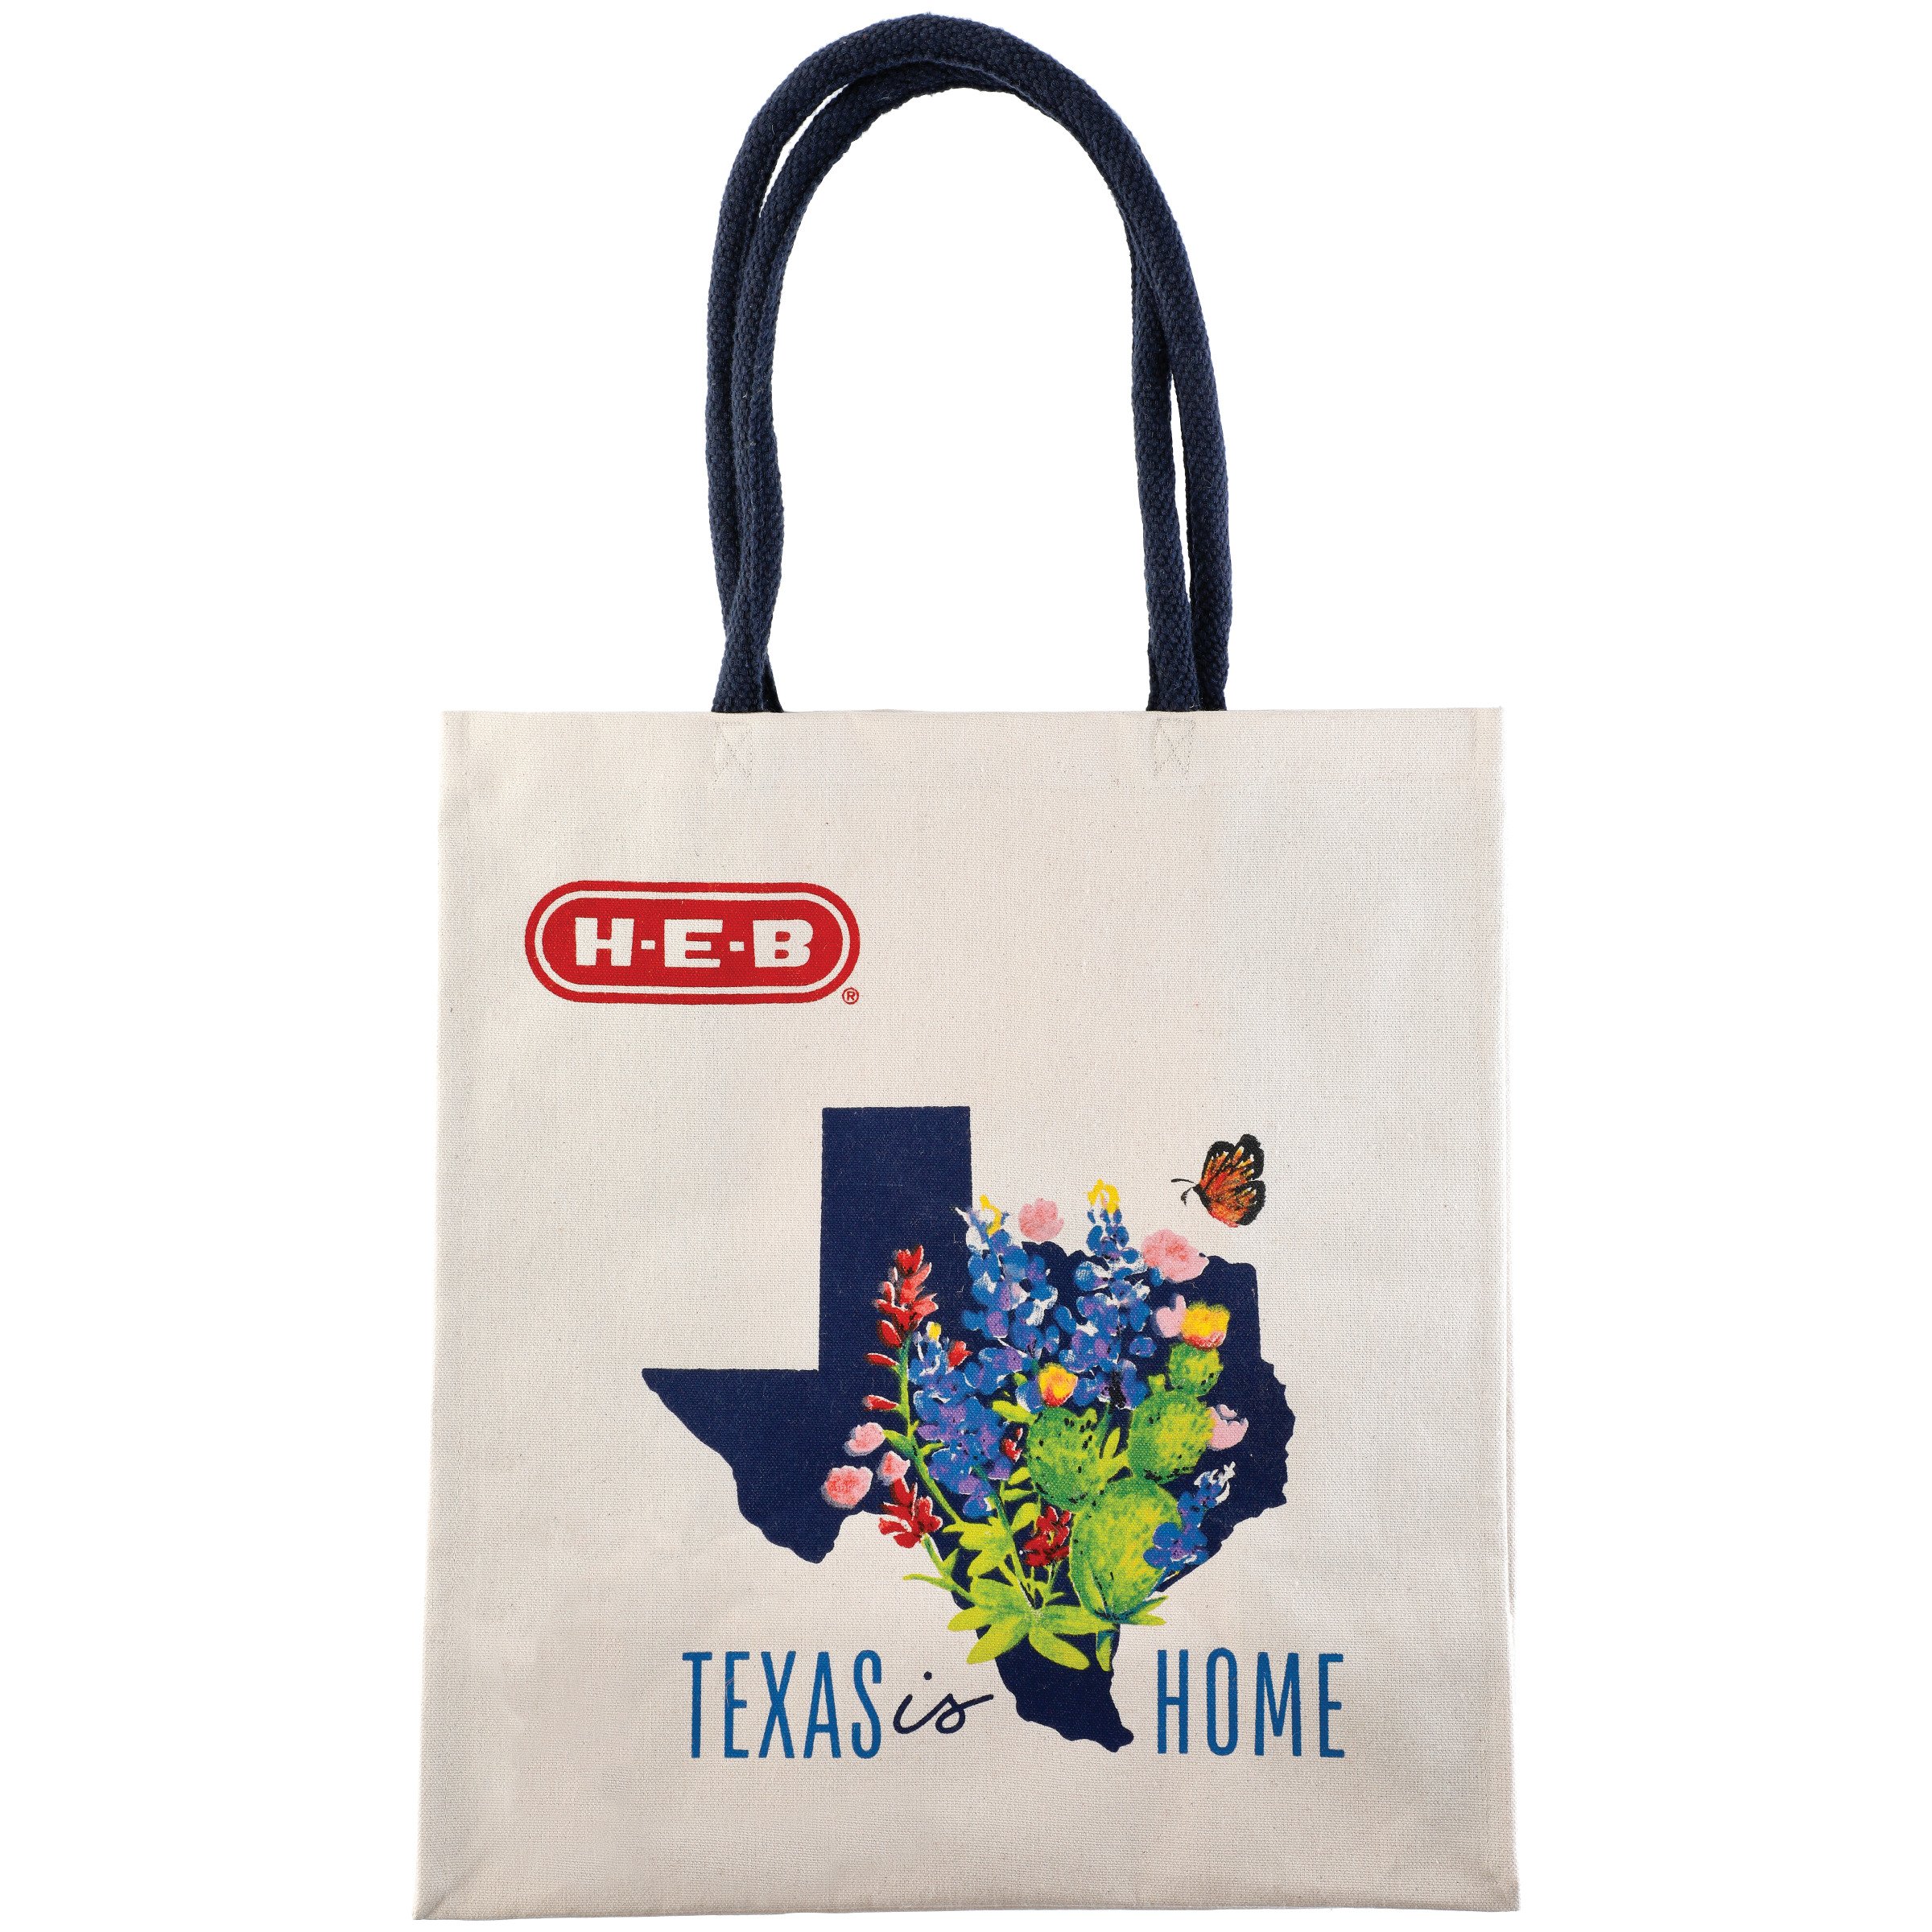 Reusable Shopping Bags for sale in Kyle, Texas